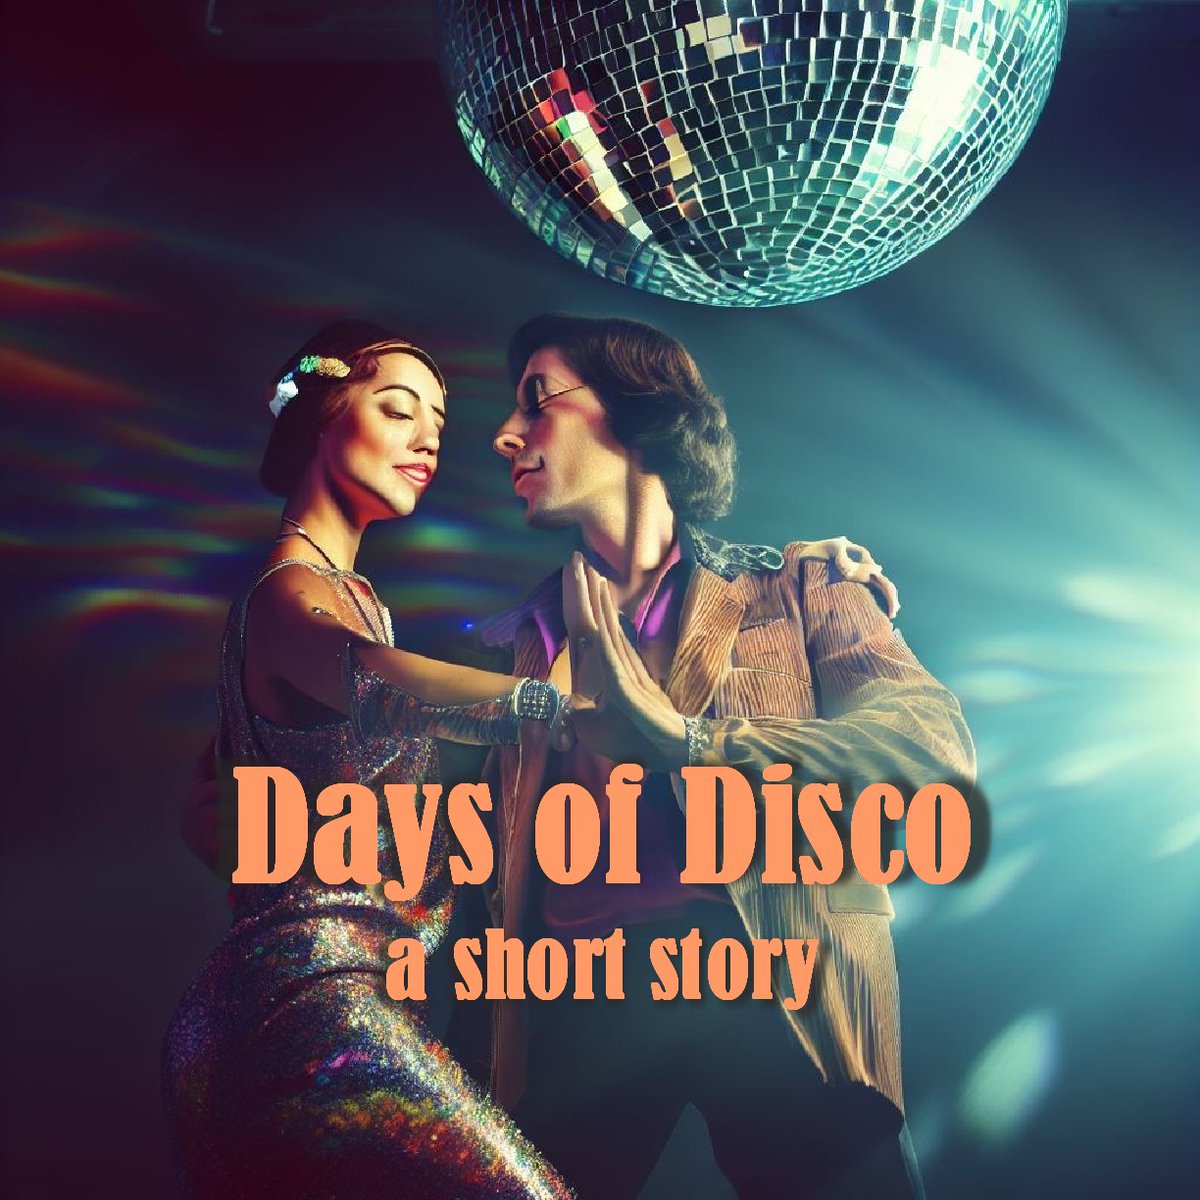 🪩 Being part of a craze doesn't mean you're crazy - or does it?

#comingofage #shortstory #freetoread #Clementines
#WeekendReads #shortread #EricWilder
 
MURKY BAYOU: Days of Disco murkybayou.blogspot.com/2010/04/days-o…